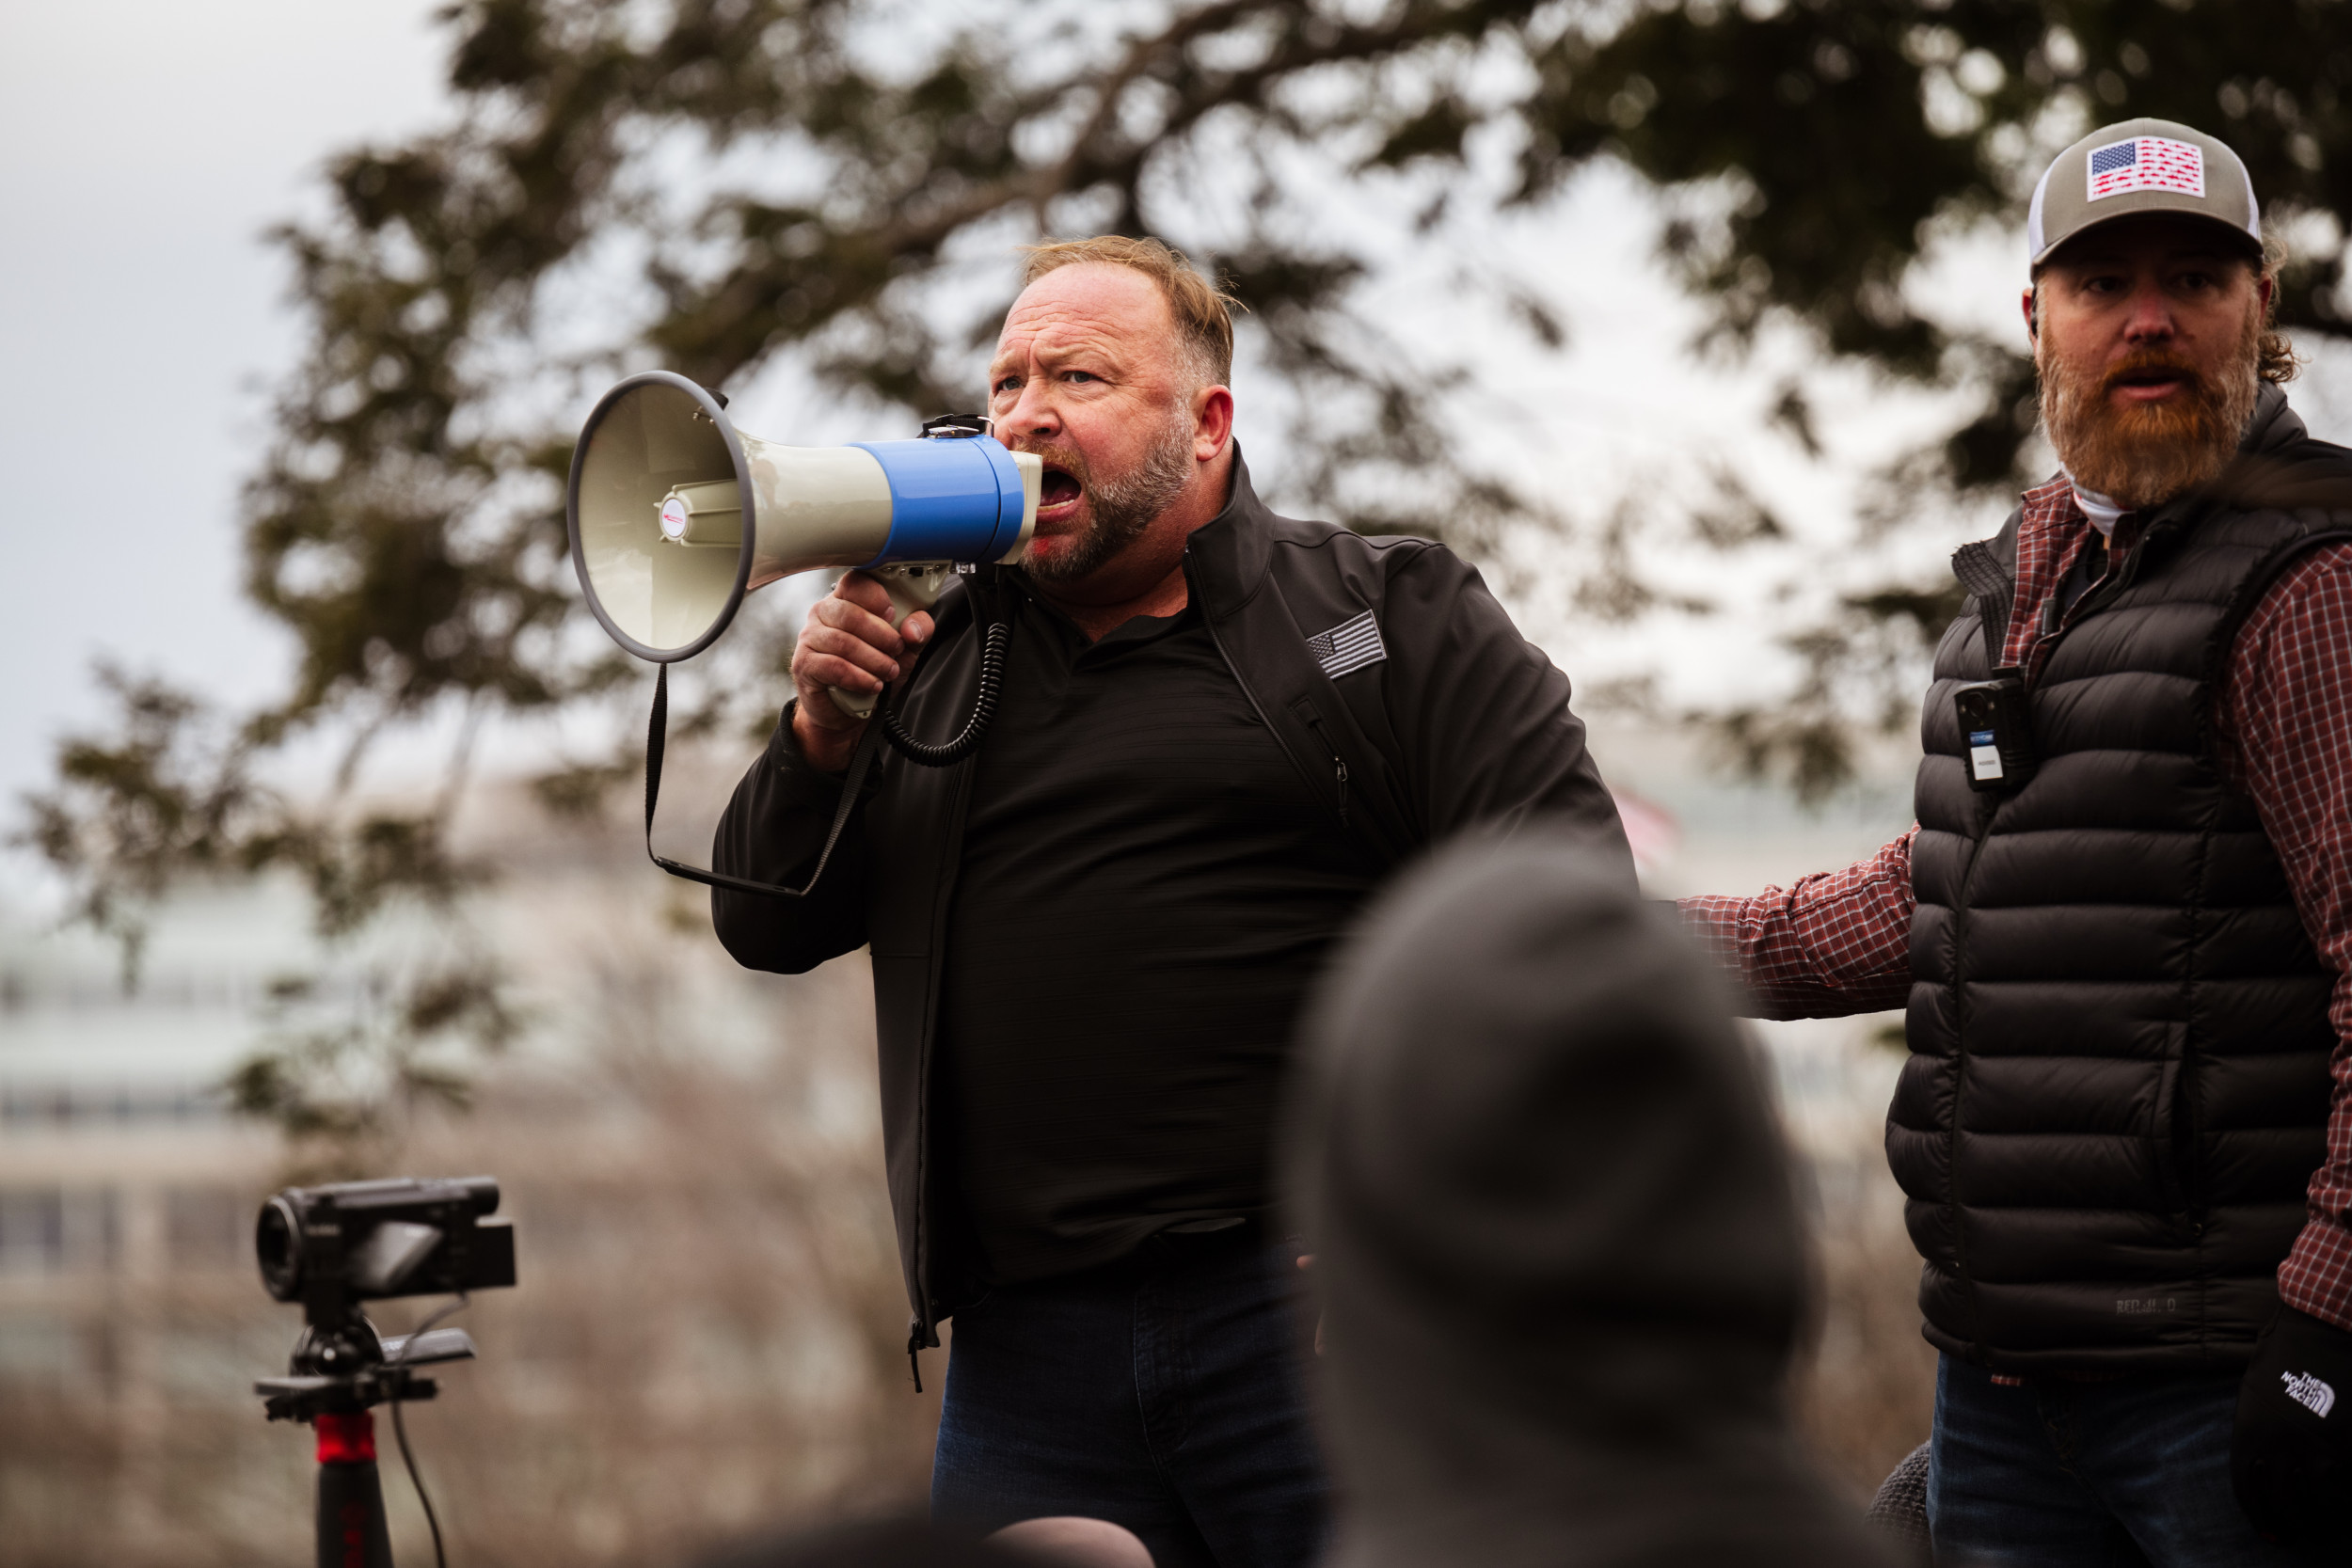 Alex Jones Not Going Anywhere as Case Makes Him a 'Martyr': Legal Analyst